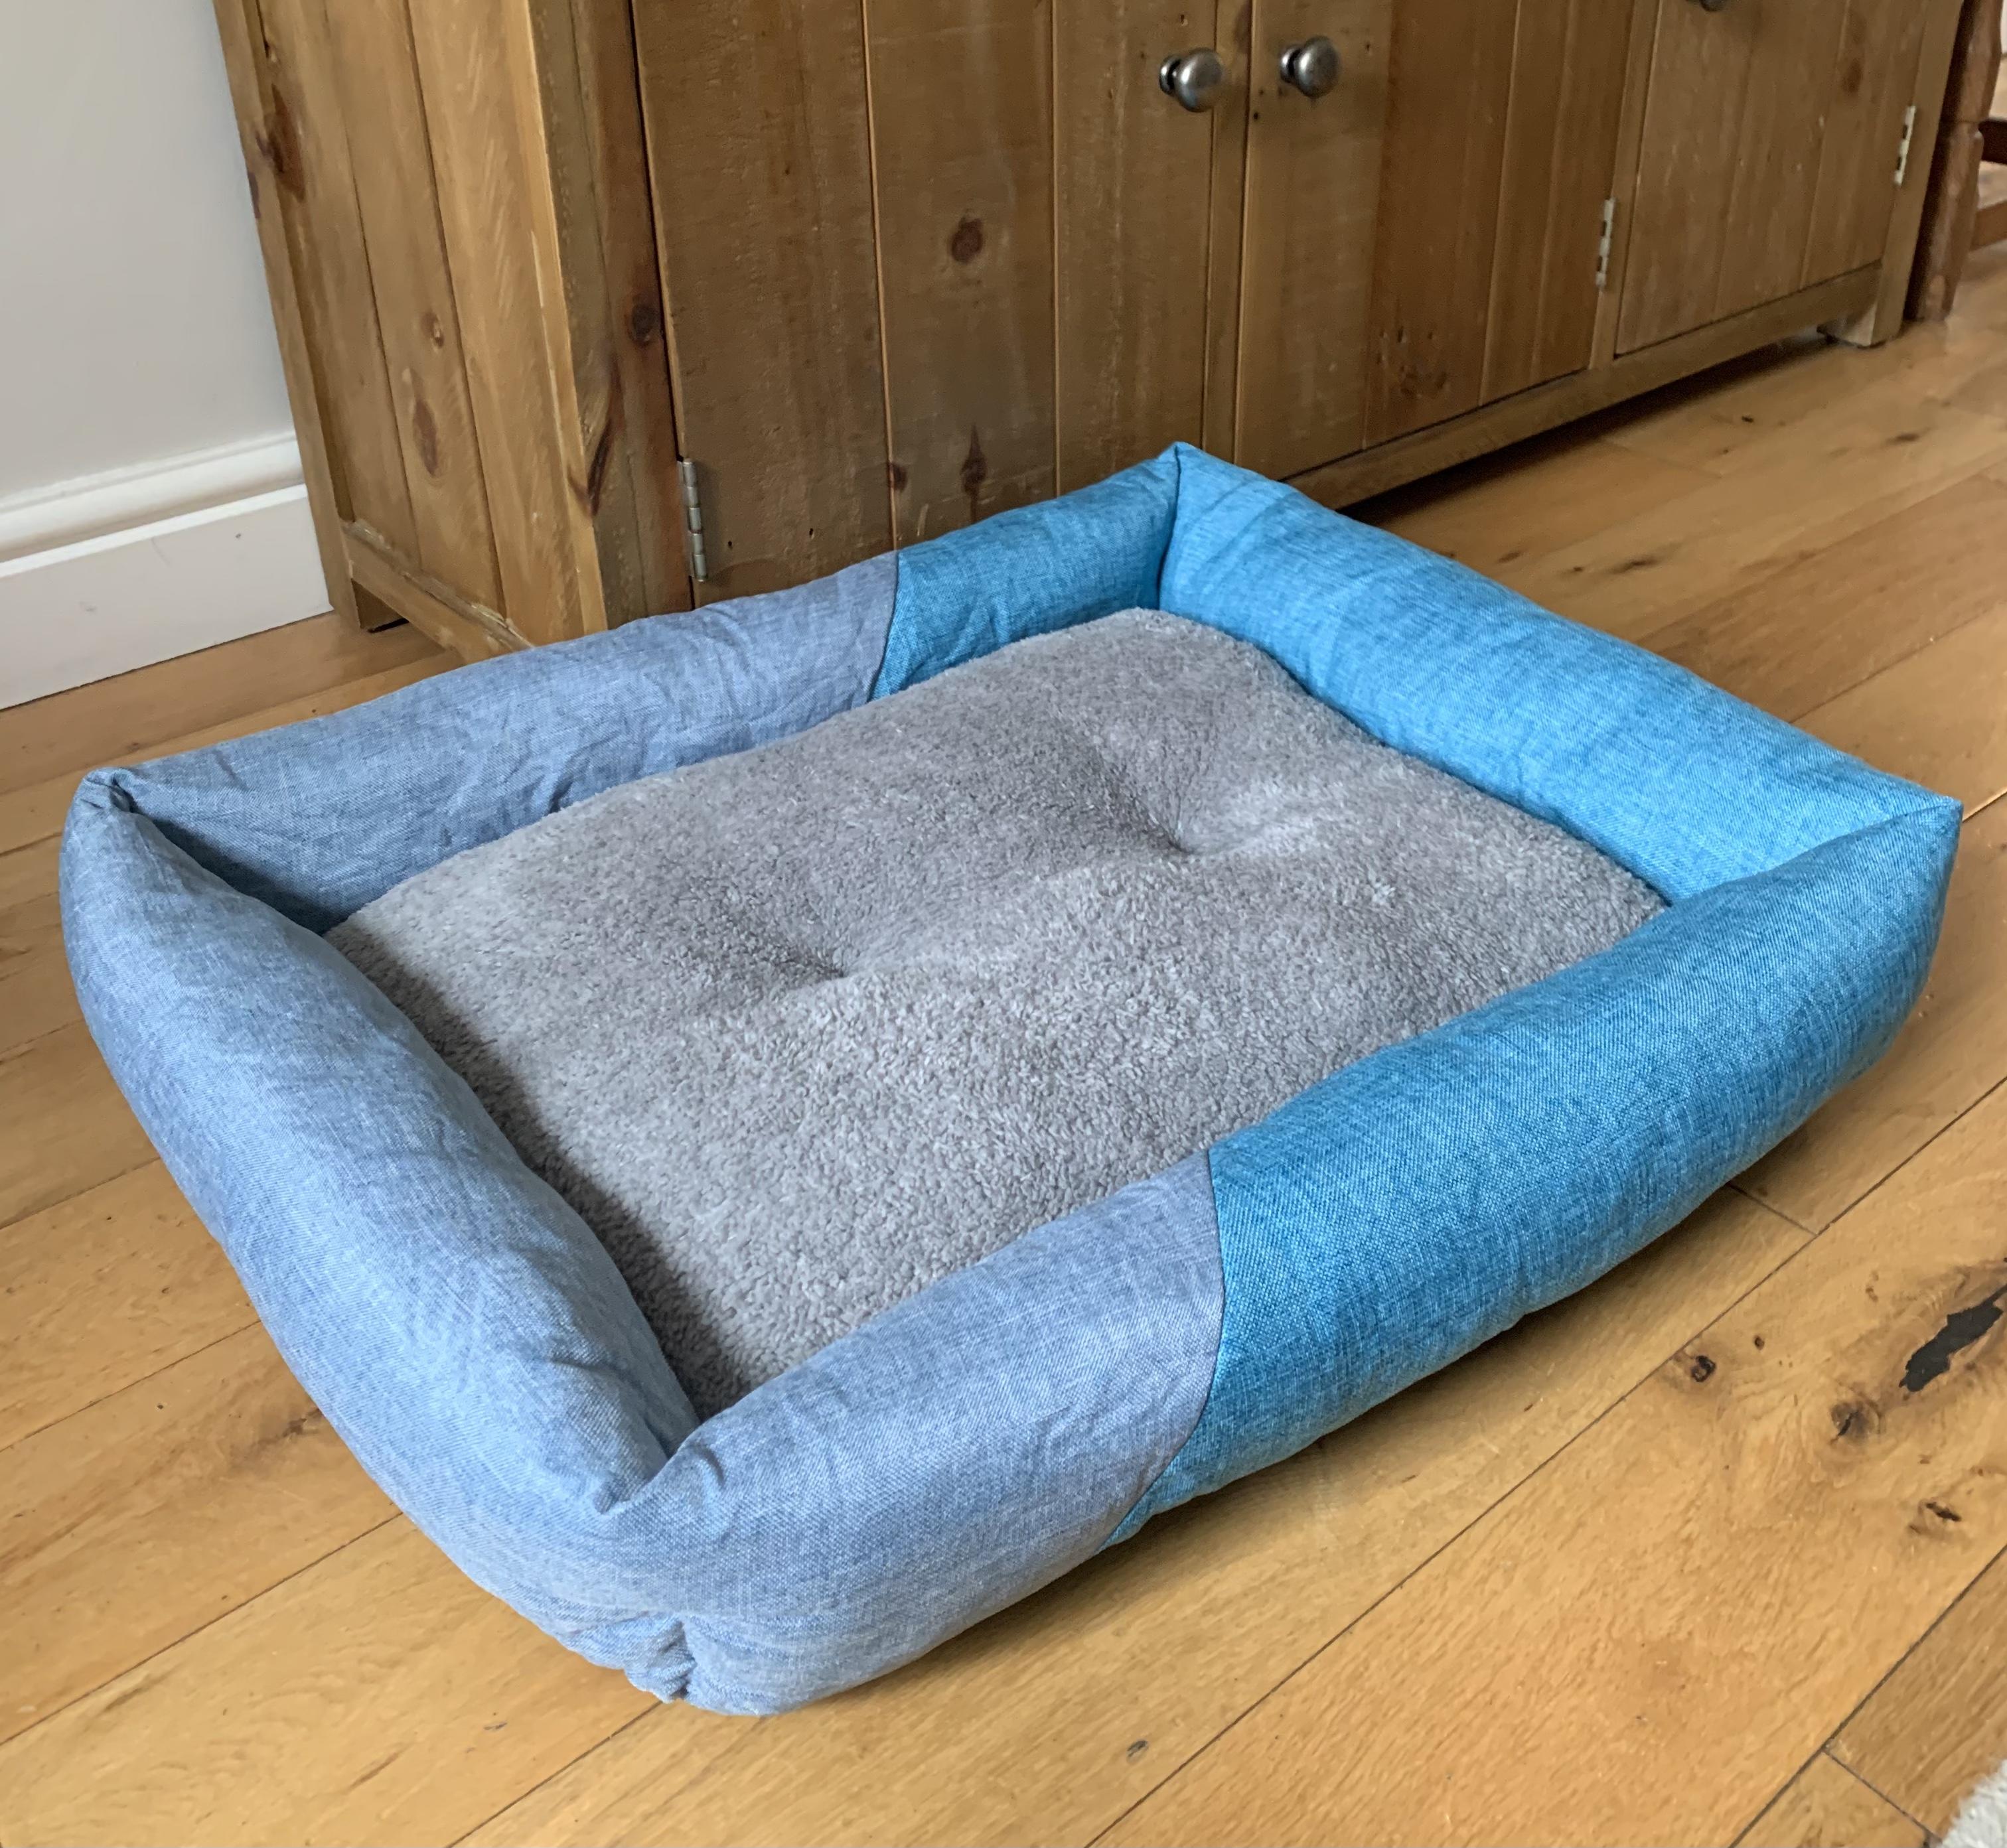 Anti-anxiety puppy bed on wooden floor